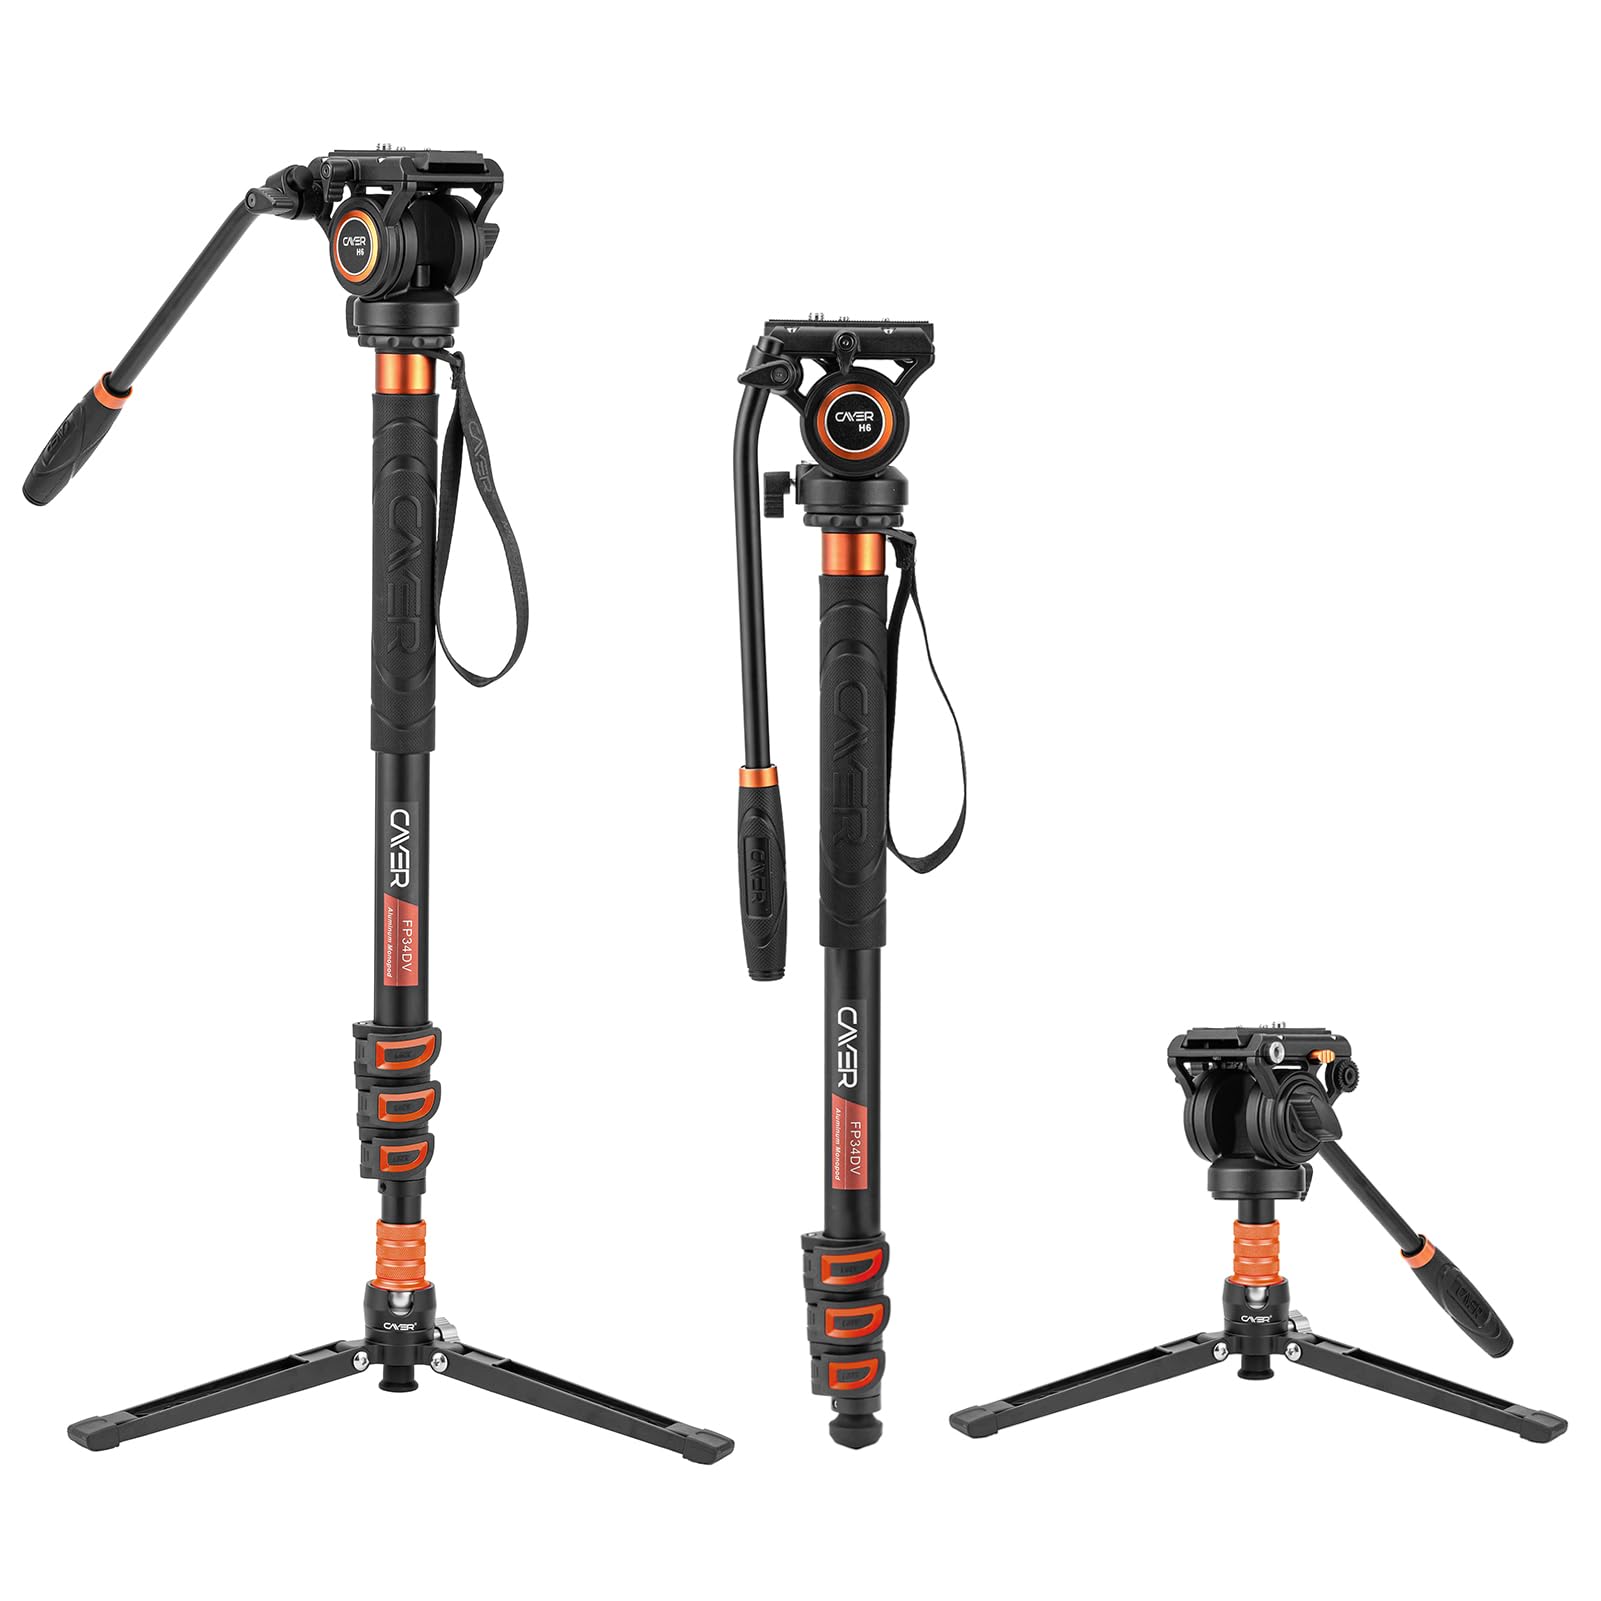 Exploring The Basics: What Is A Monopod?